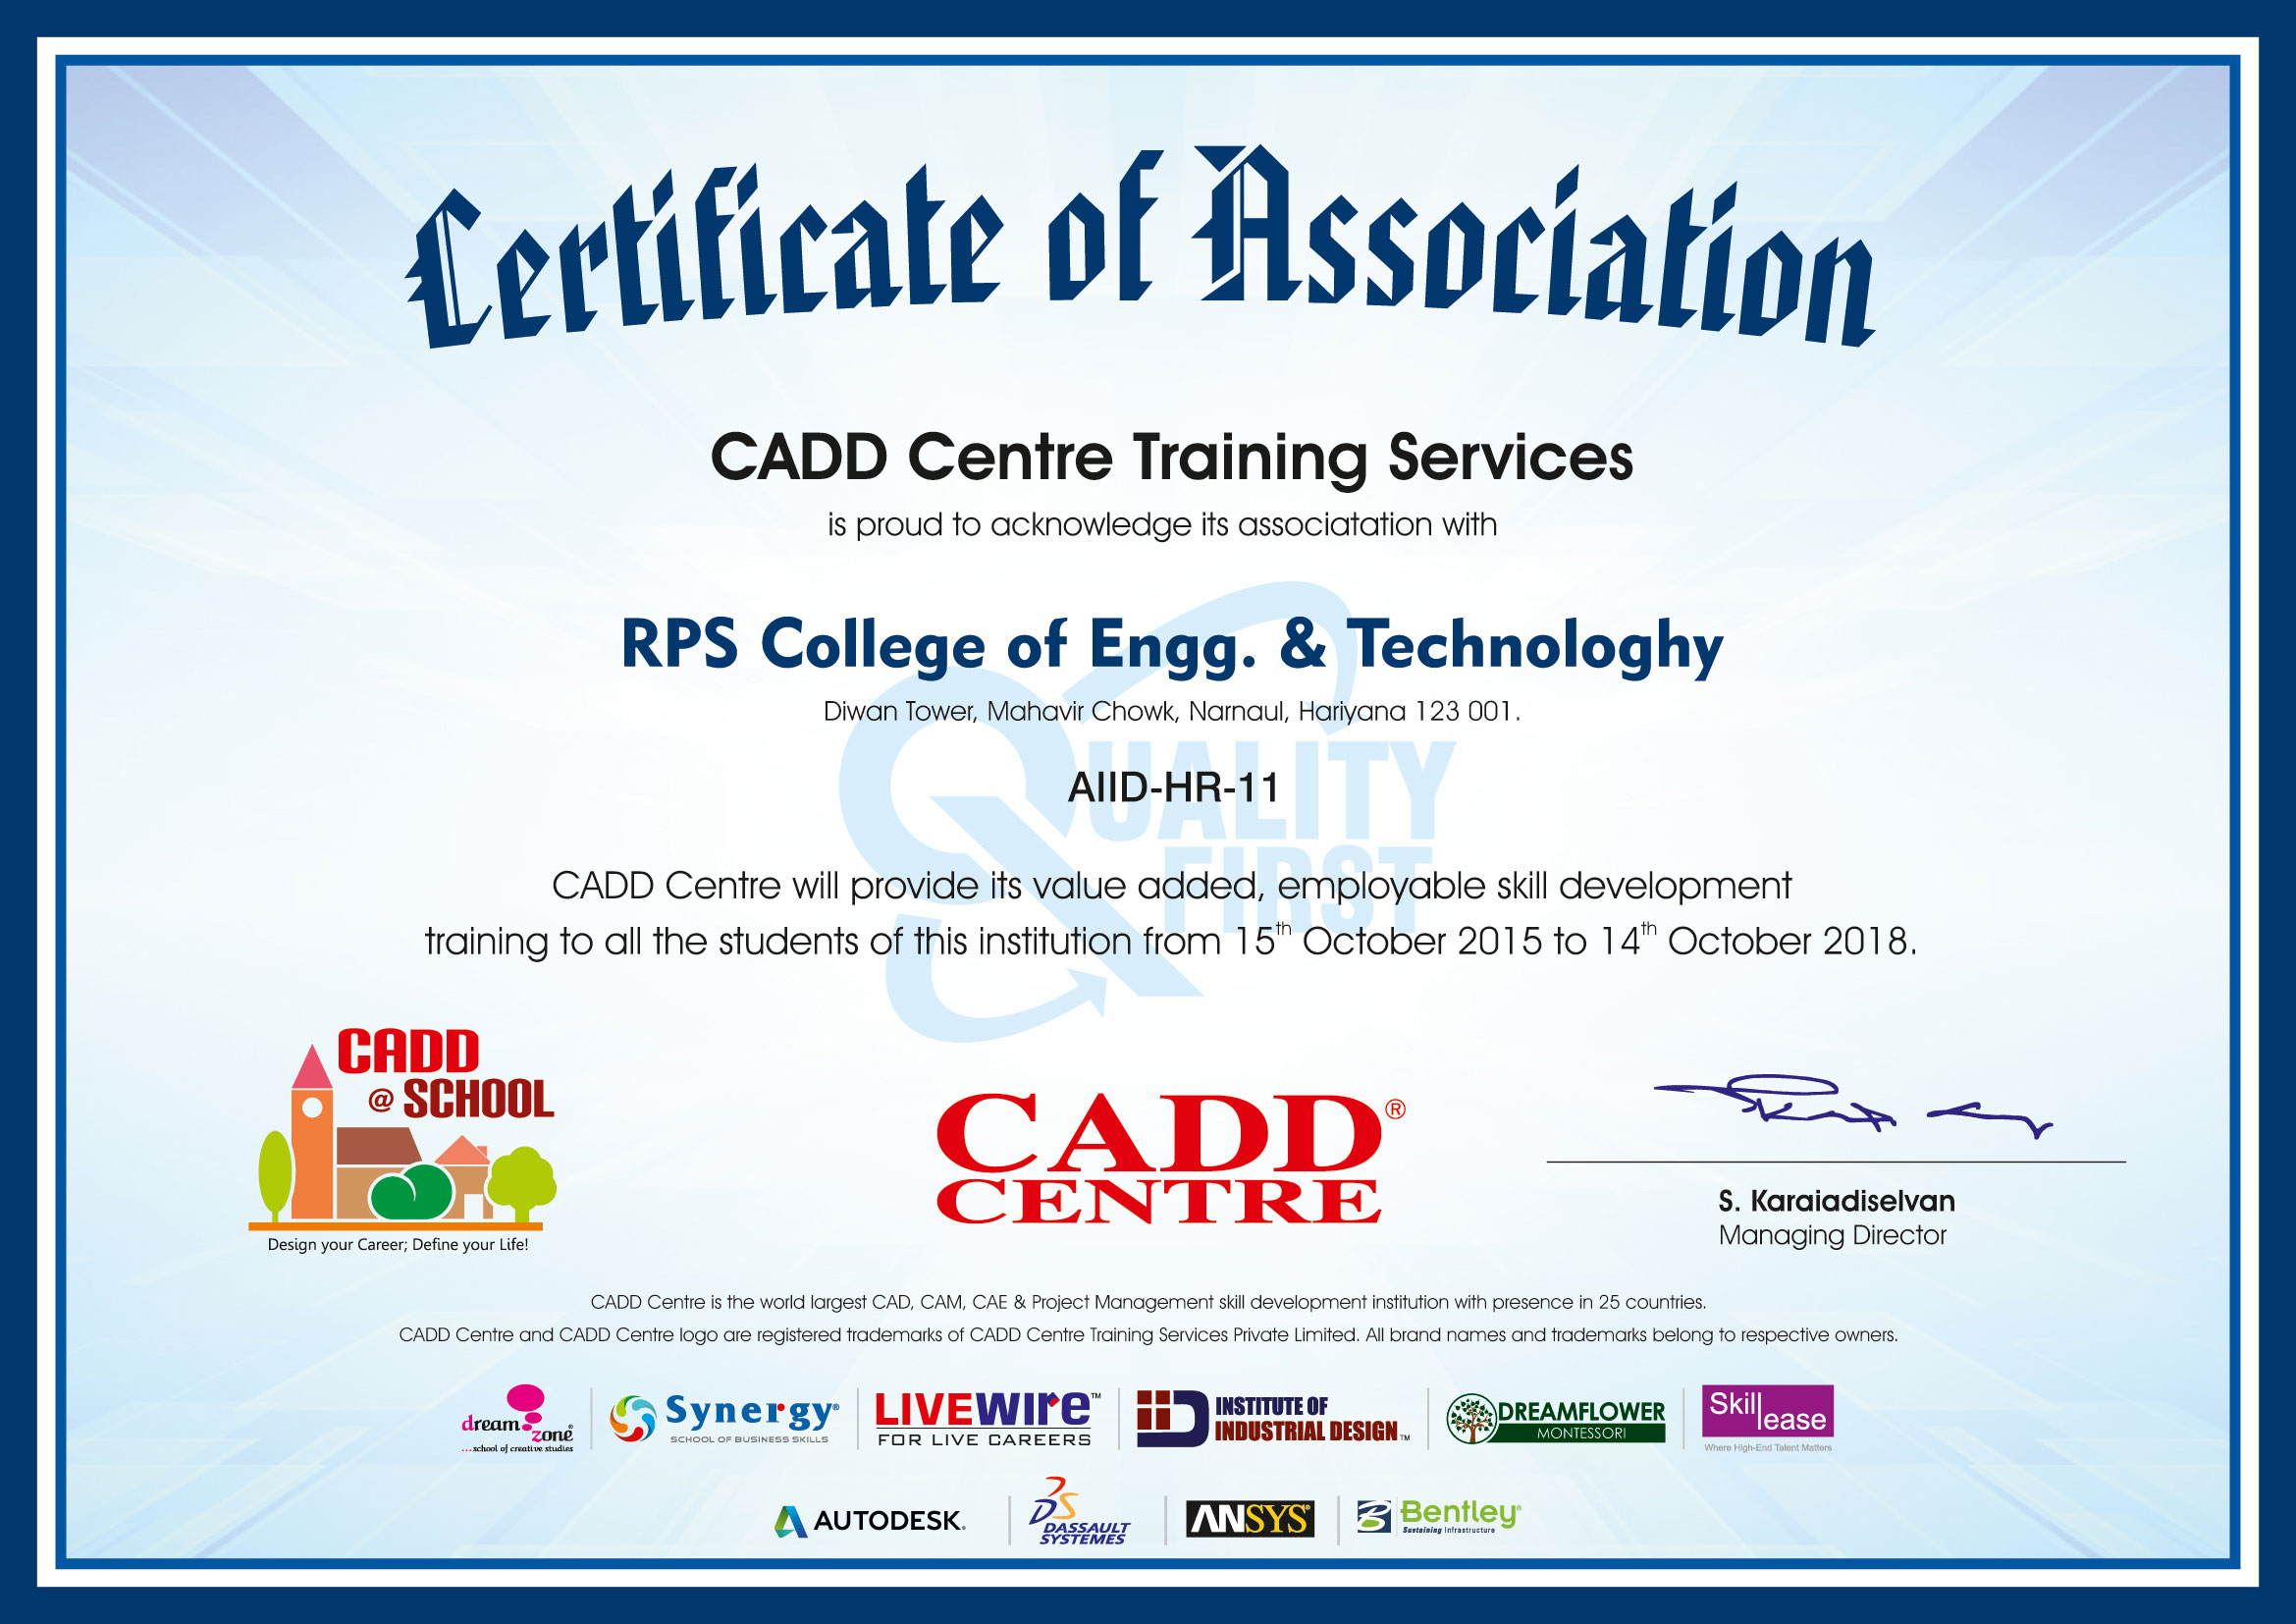 Rps_College_Engg